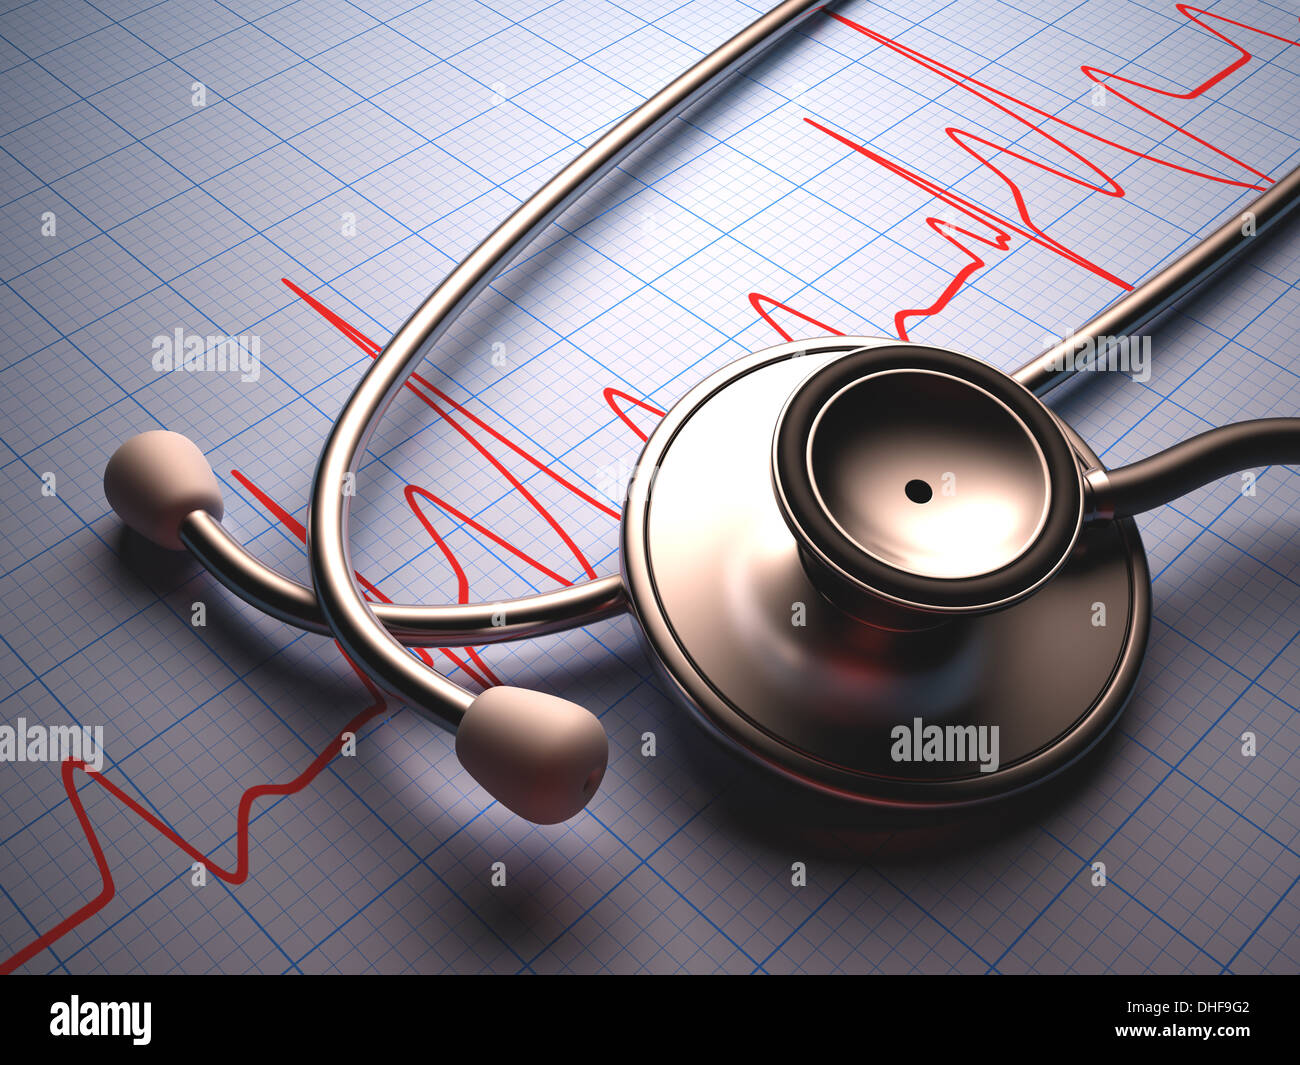 Stethoscope on a table with a heart graphic. Clipping path included. Stock Photo